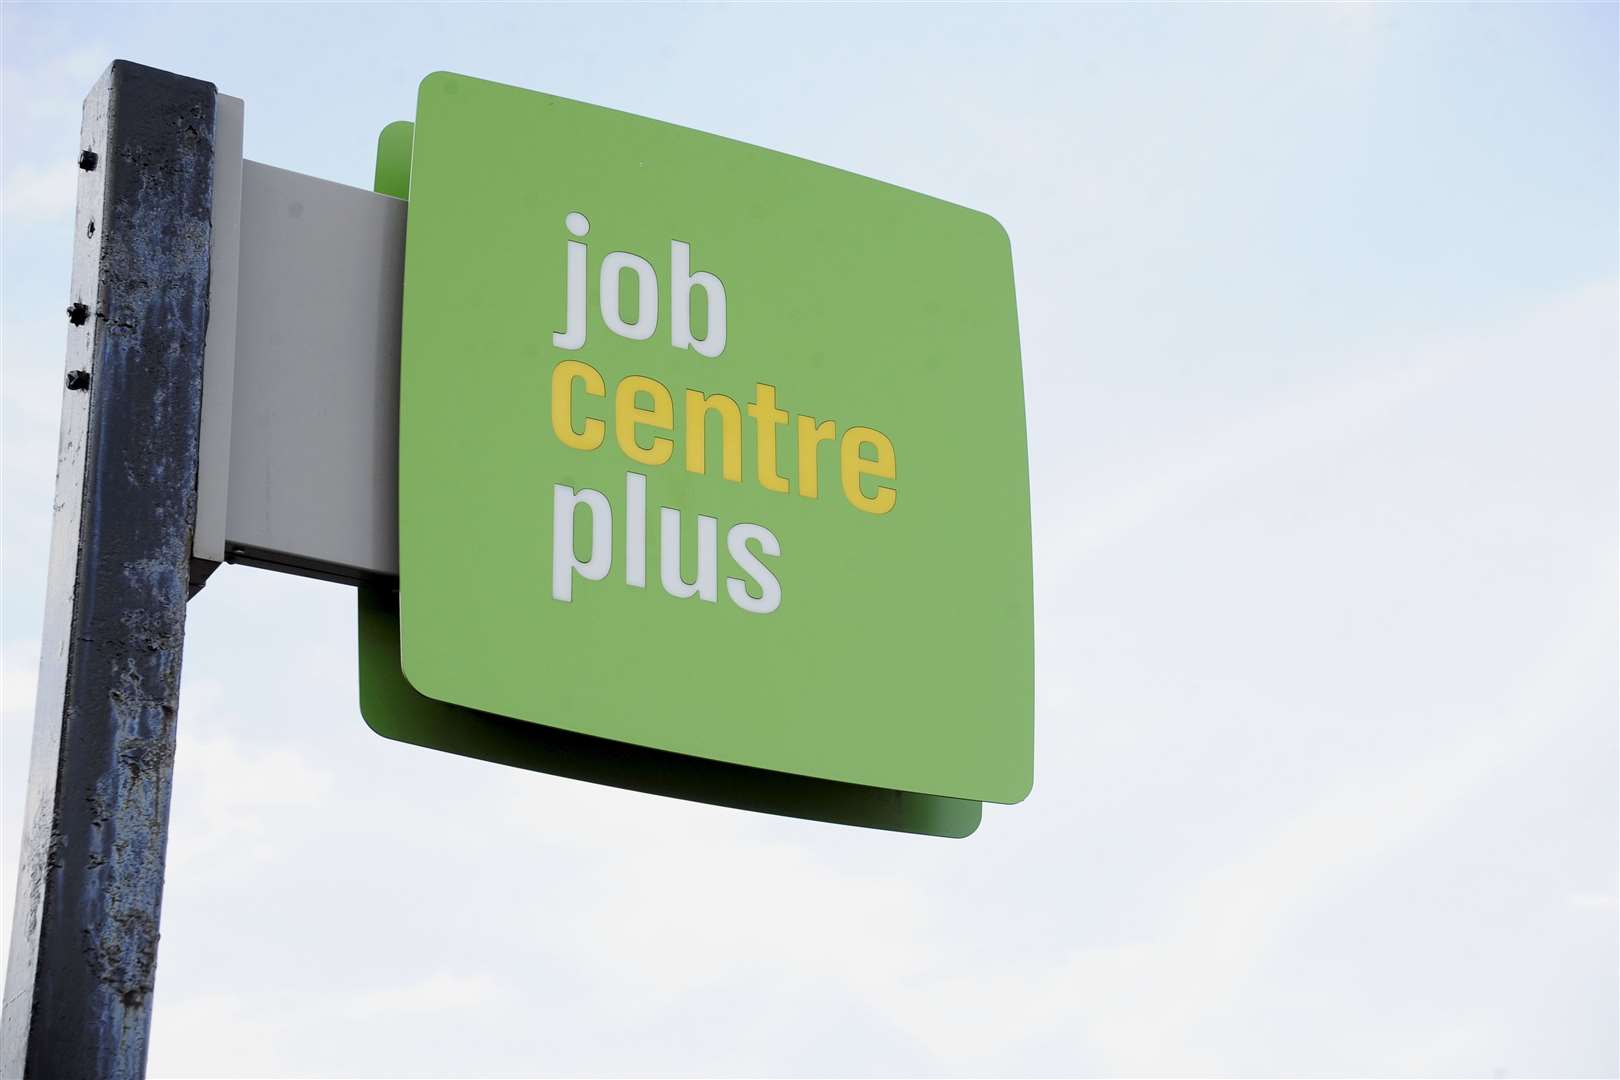 Moray's latest jobless figures have been released.